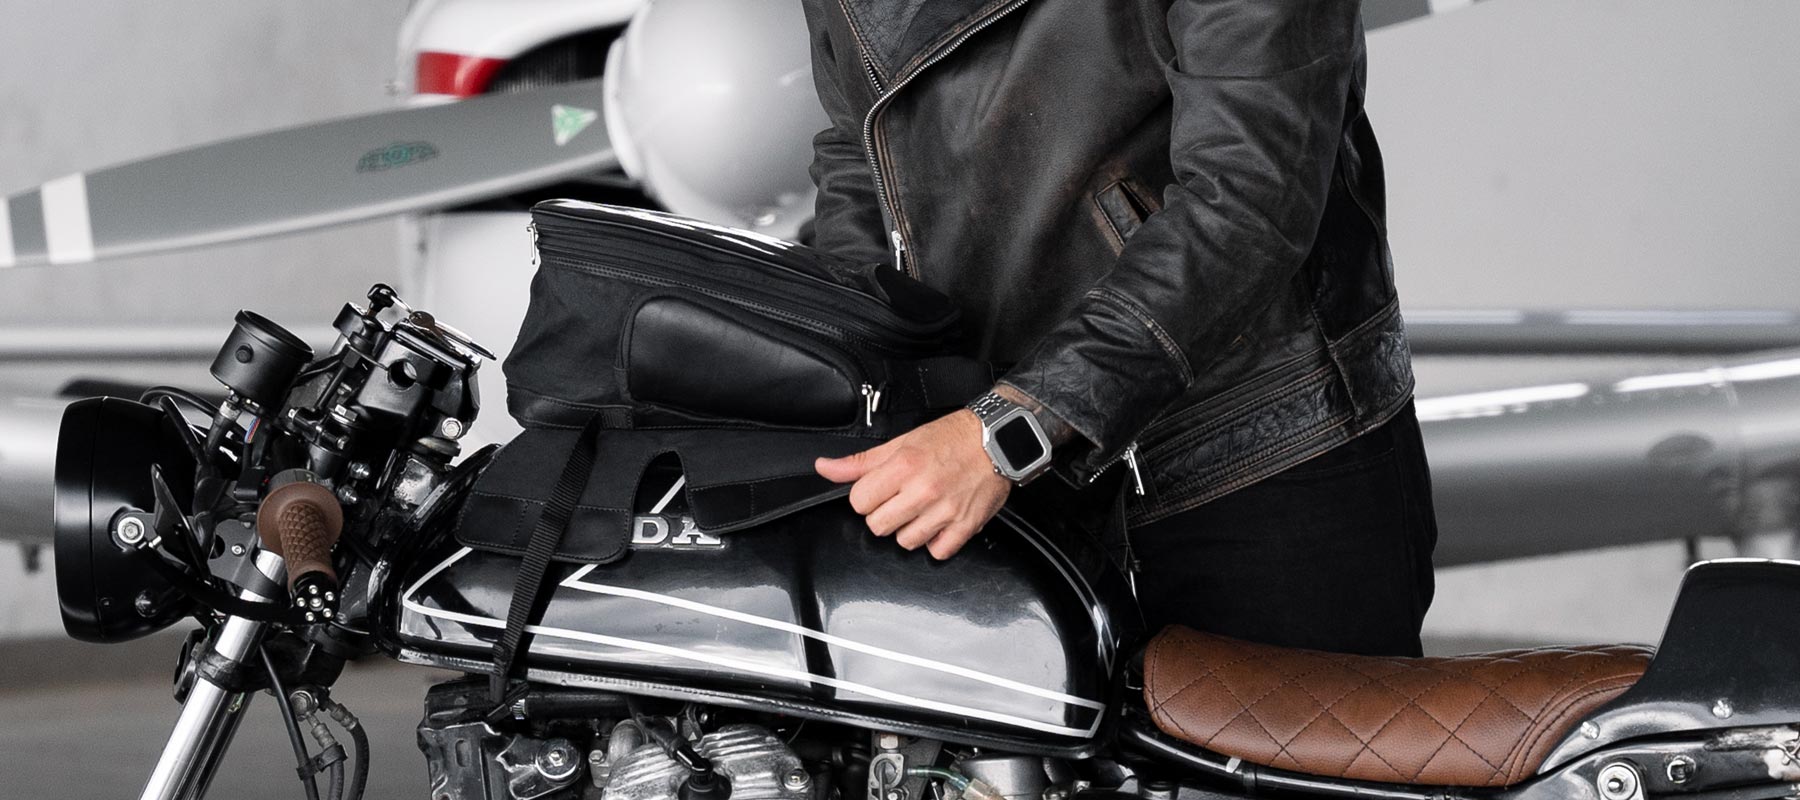 Magnetic tank bag on cafe racer style moto.